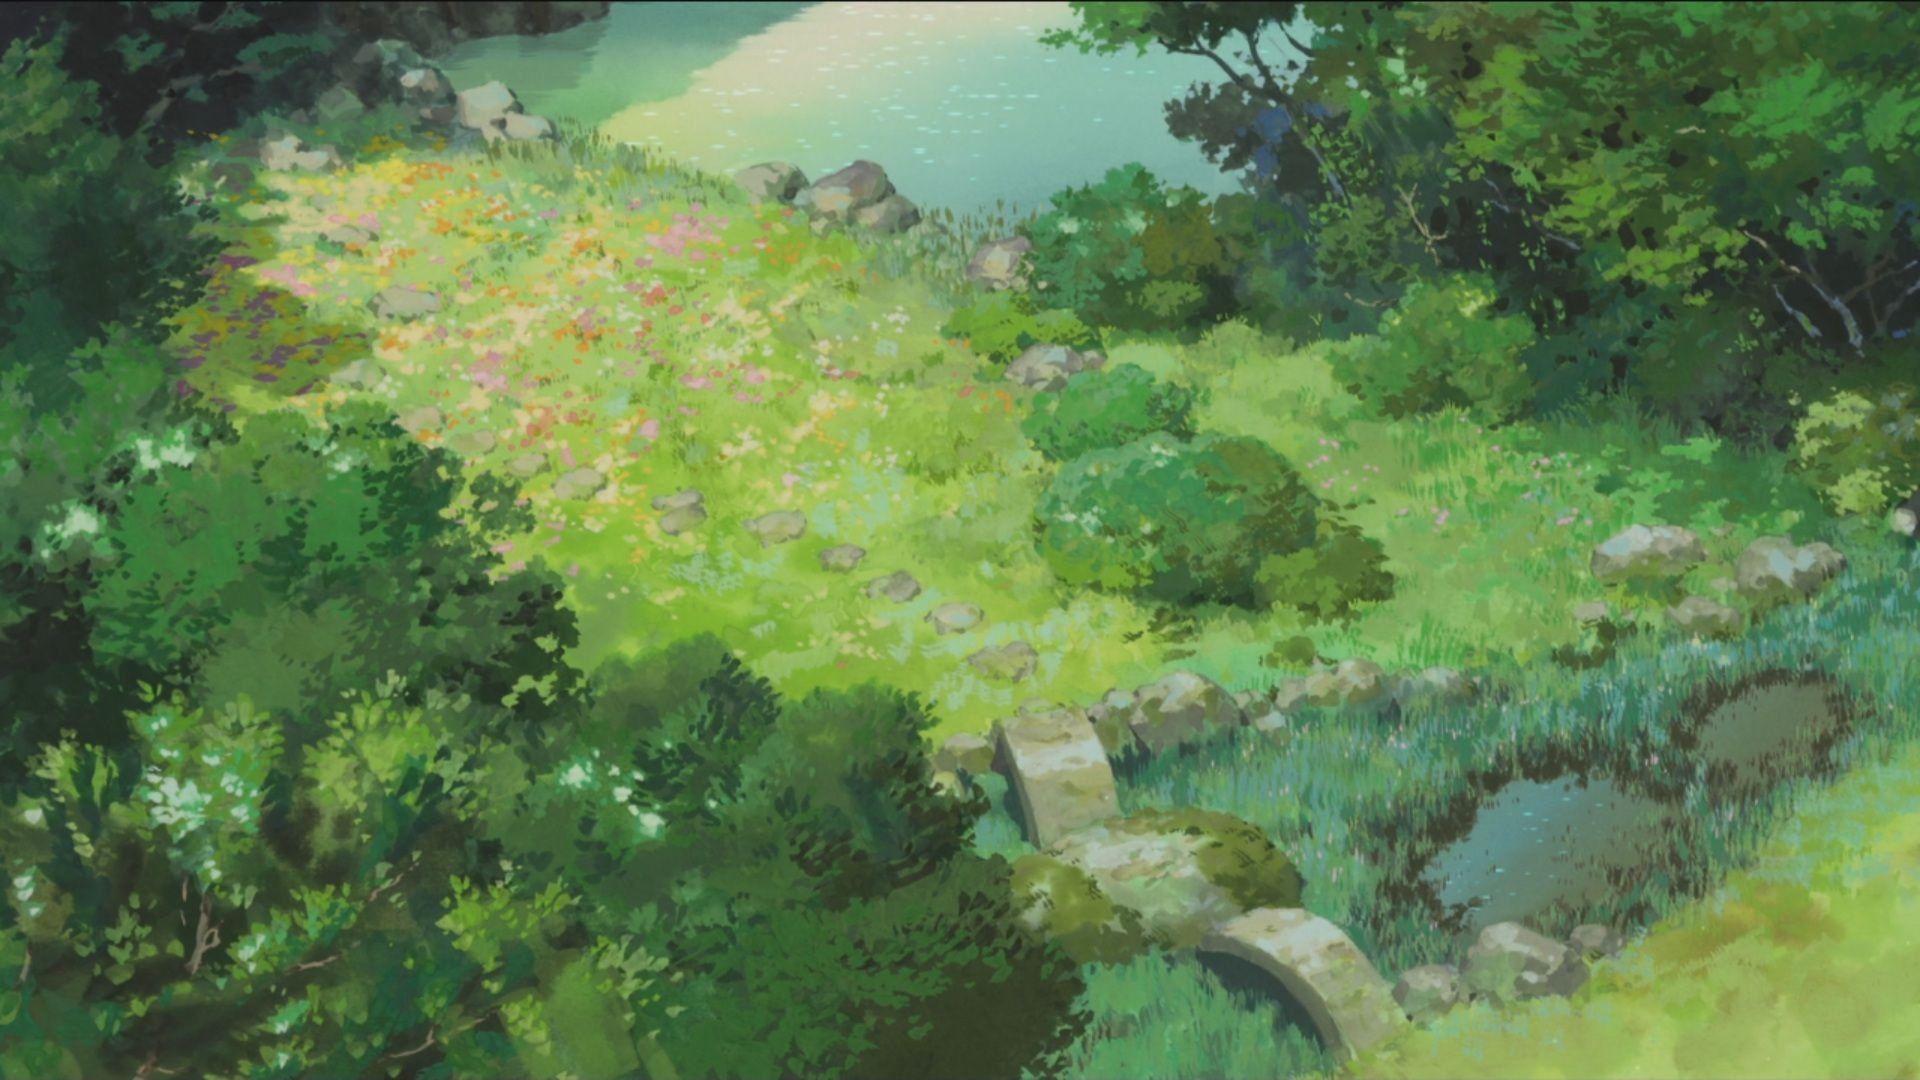 image For > Anime Forest Background